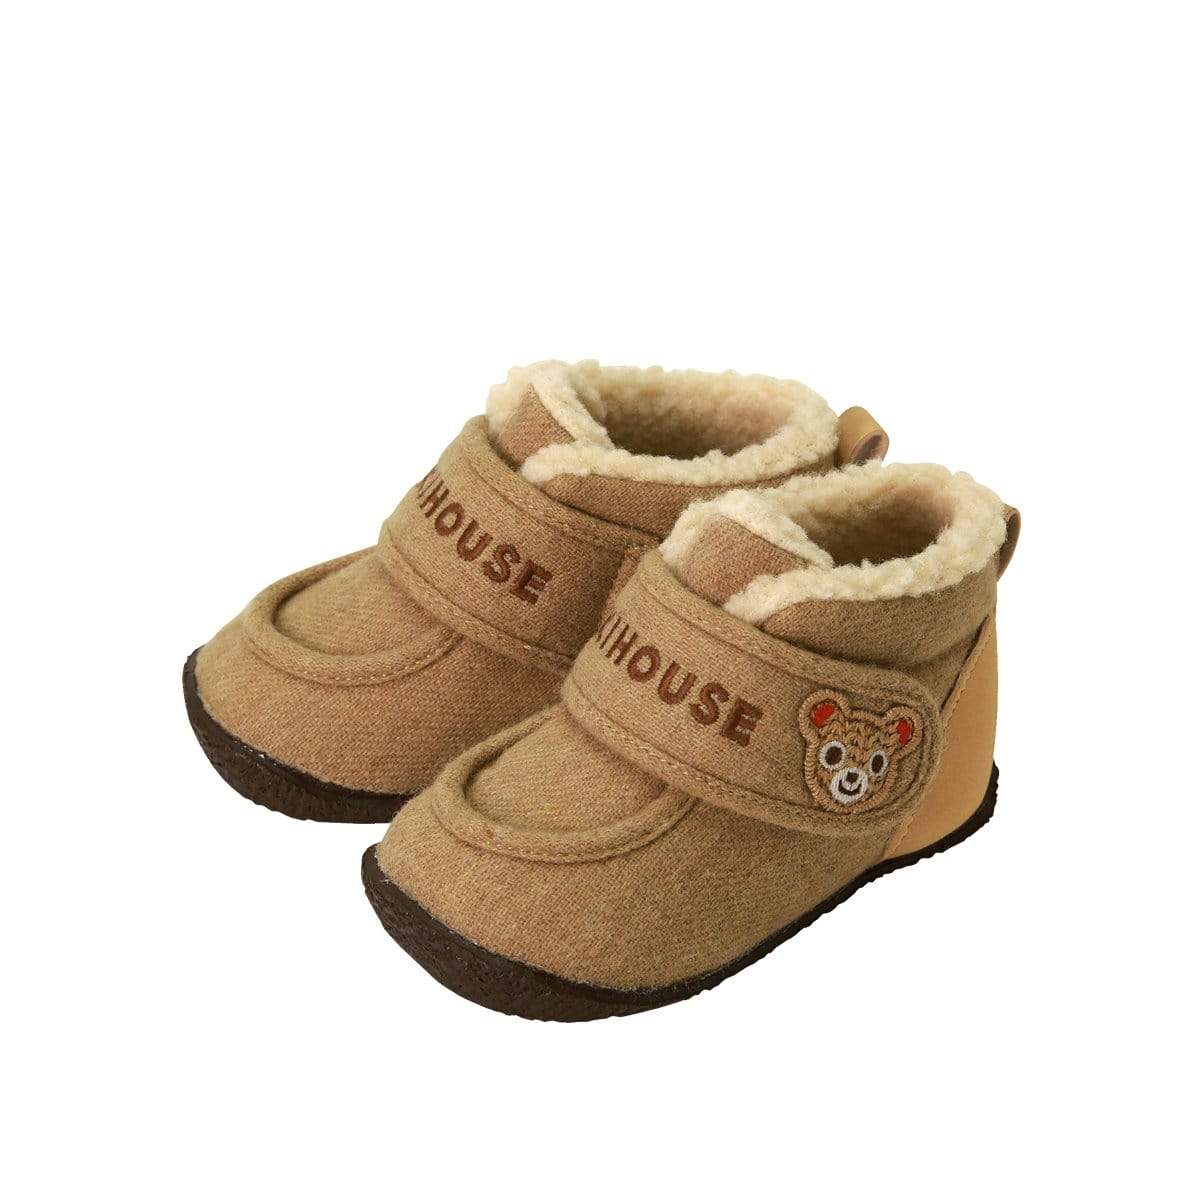 Miki House First baby shoes of brushed material - Beige - HYPHEN KIDS